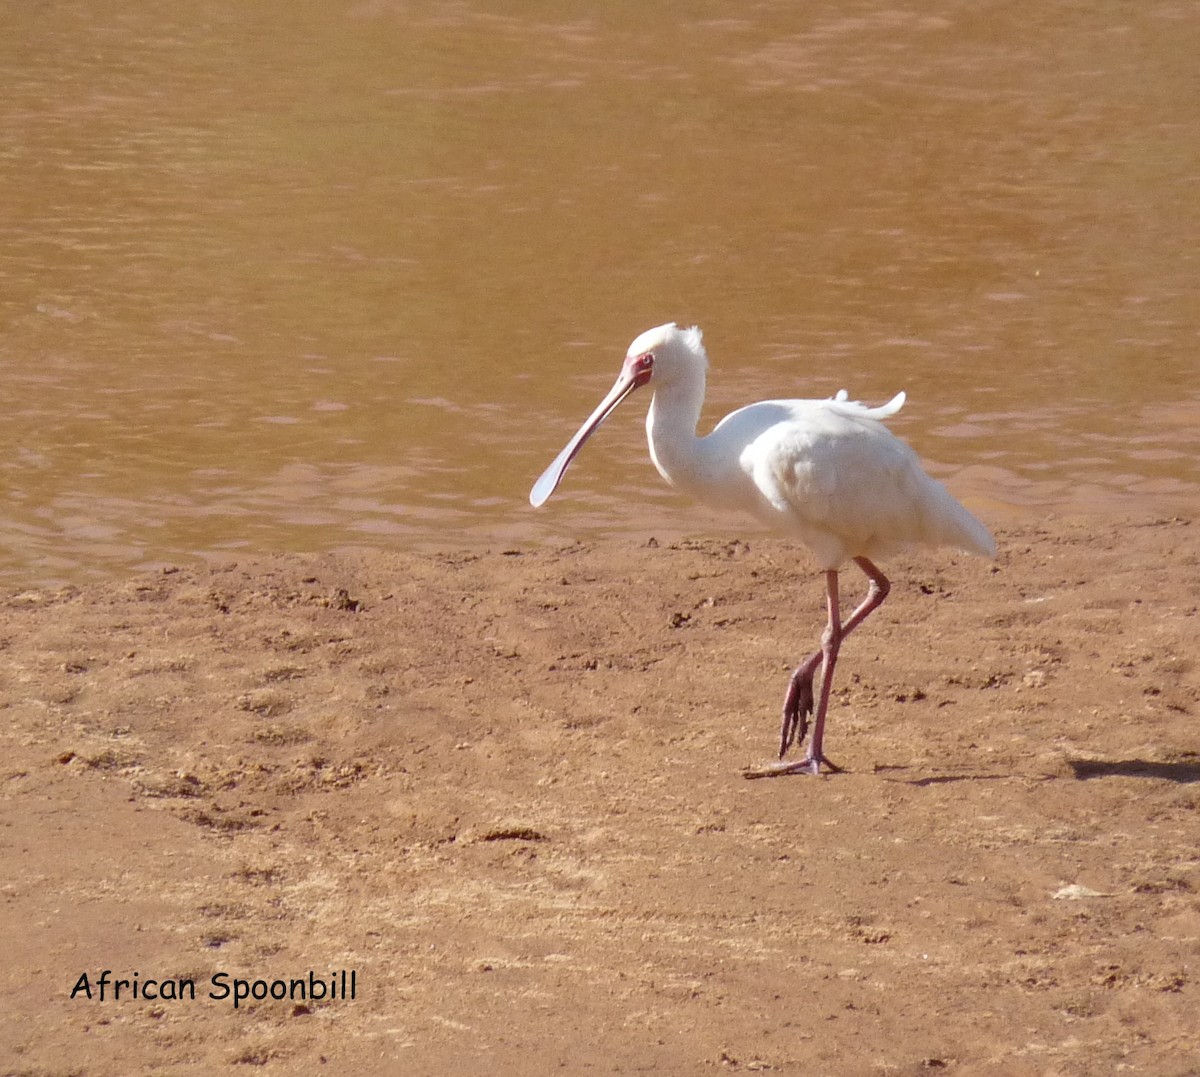 African Spoonbill - Bob Curry